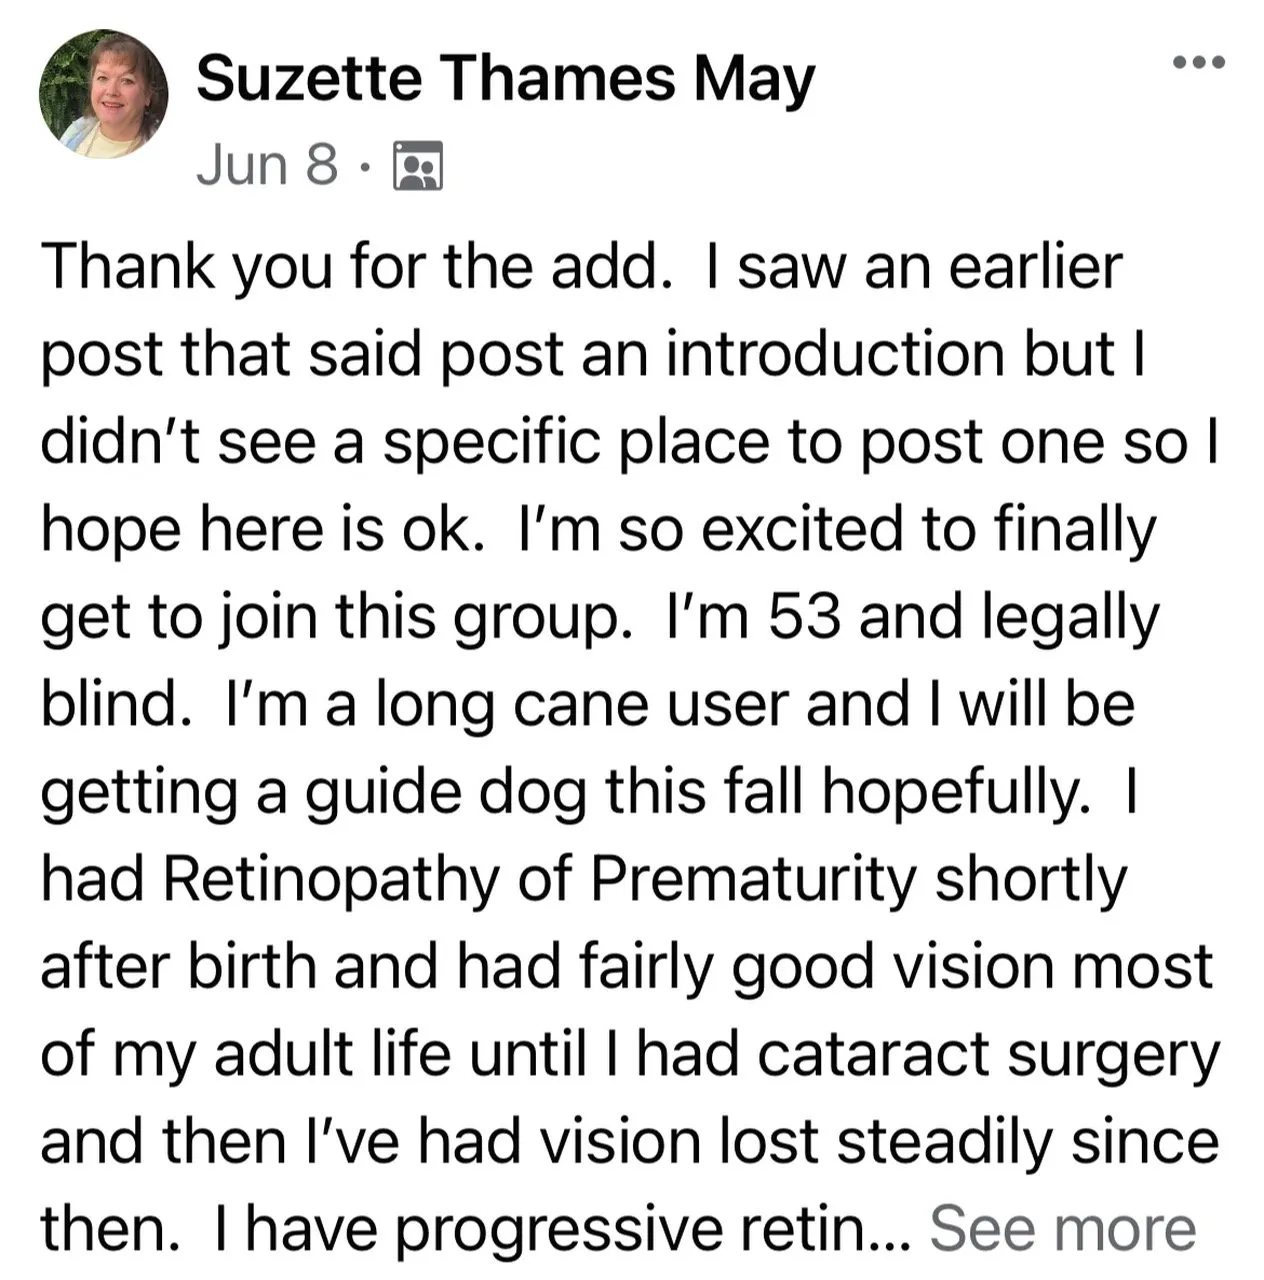 Screen shot of a post from Suzette May that reads I am so excited to finally get to join this group. I'm 53 and legally blind. I'm a long cane user ad I will be getting a guide dog. I had Retinopathy of Prematurity shortly after birth and had fily good vision most of my adult life until I had cataract surgery ad then I steadily lost vision.